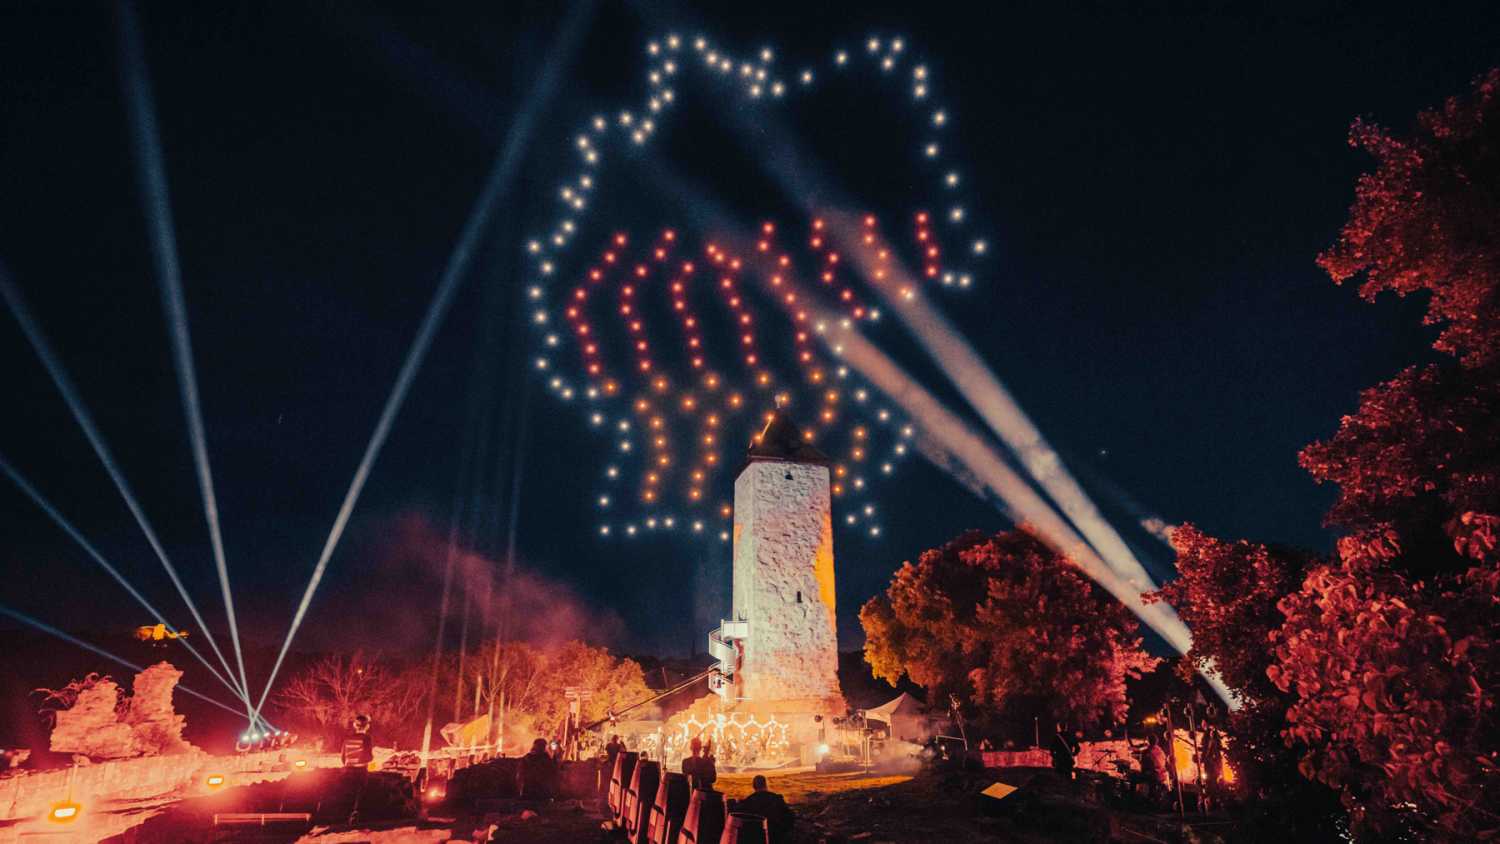 The multimedia drone show was the highlight of the closing celebrations (photo: Alexander Cevolani)